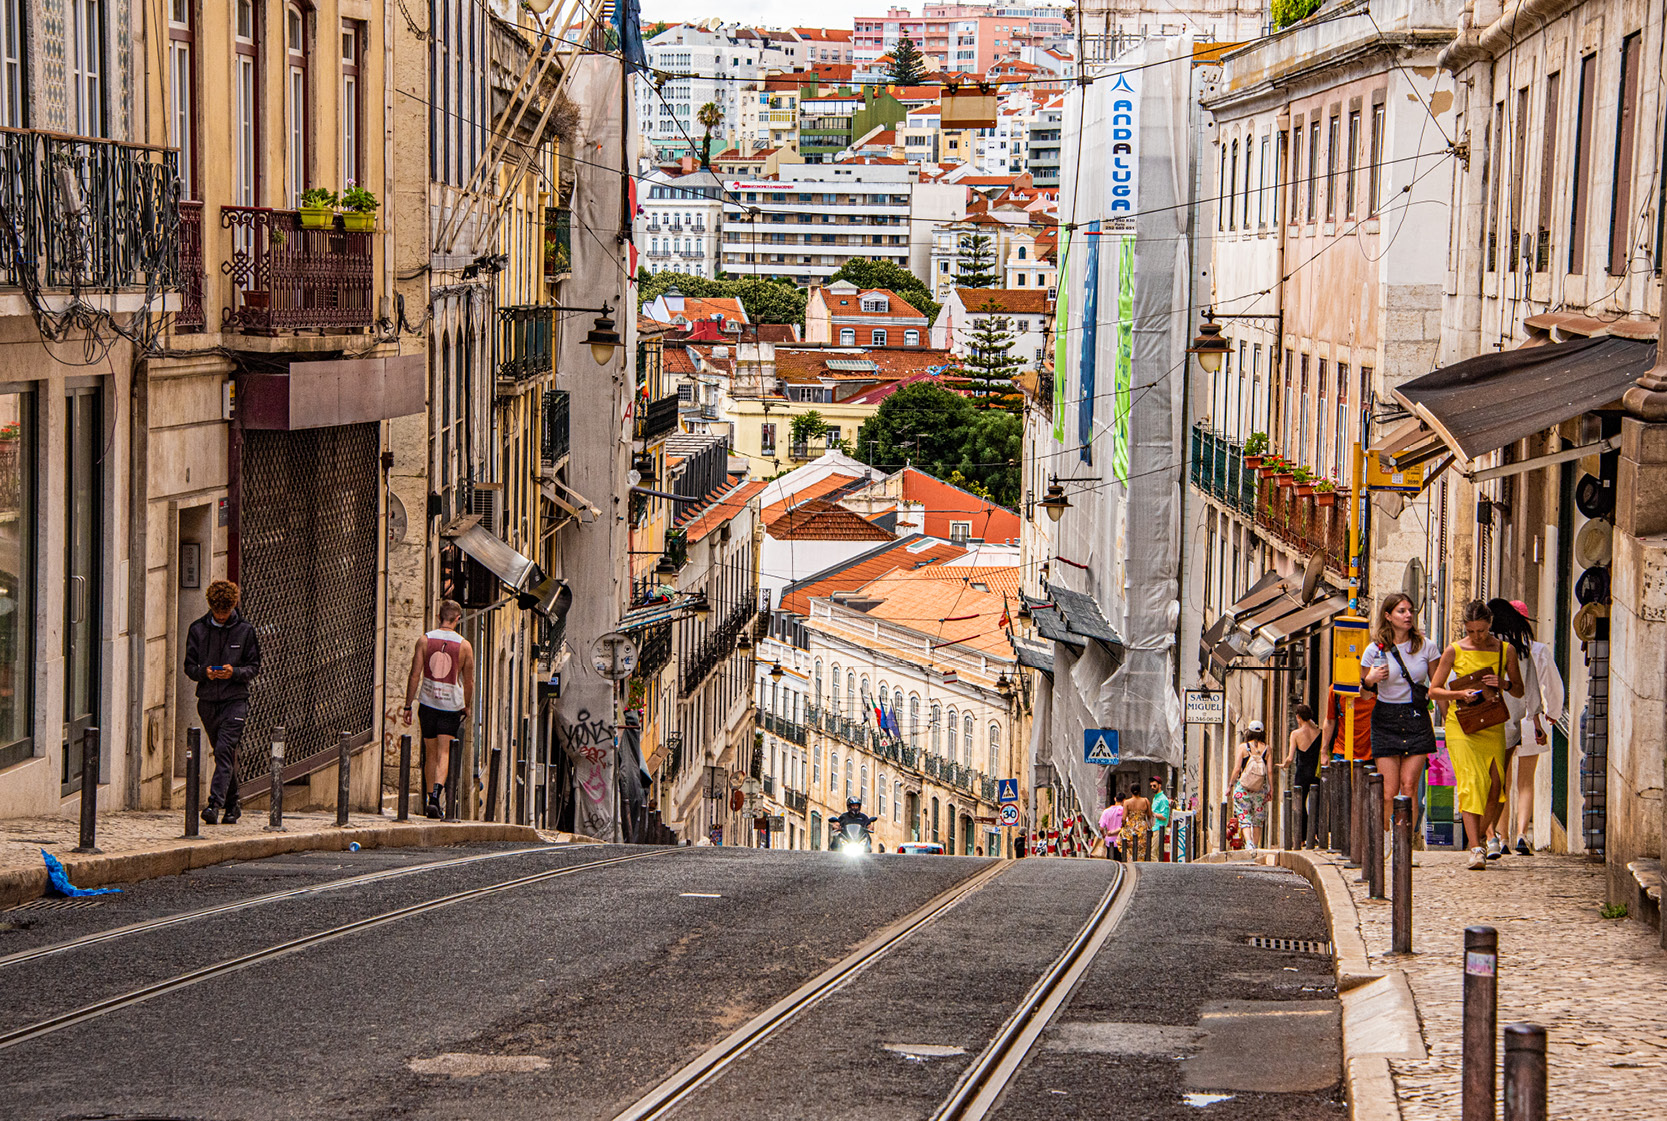 This steep hilly street in Lisbon’s Bairro Alto neighborhood characterizes the nature of many old town sections of Lisbon.